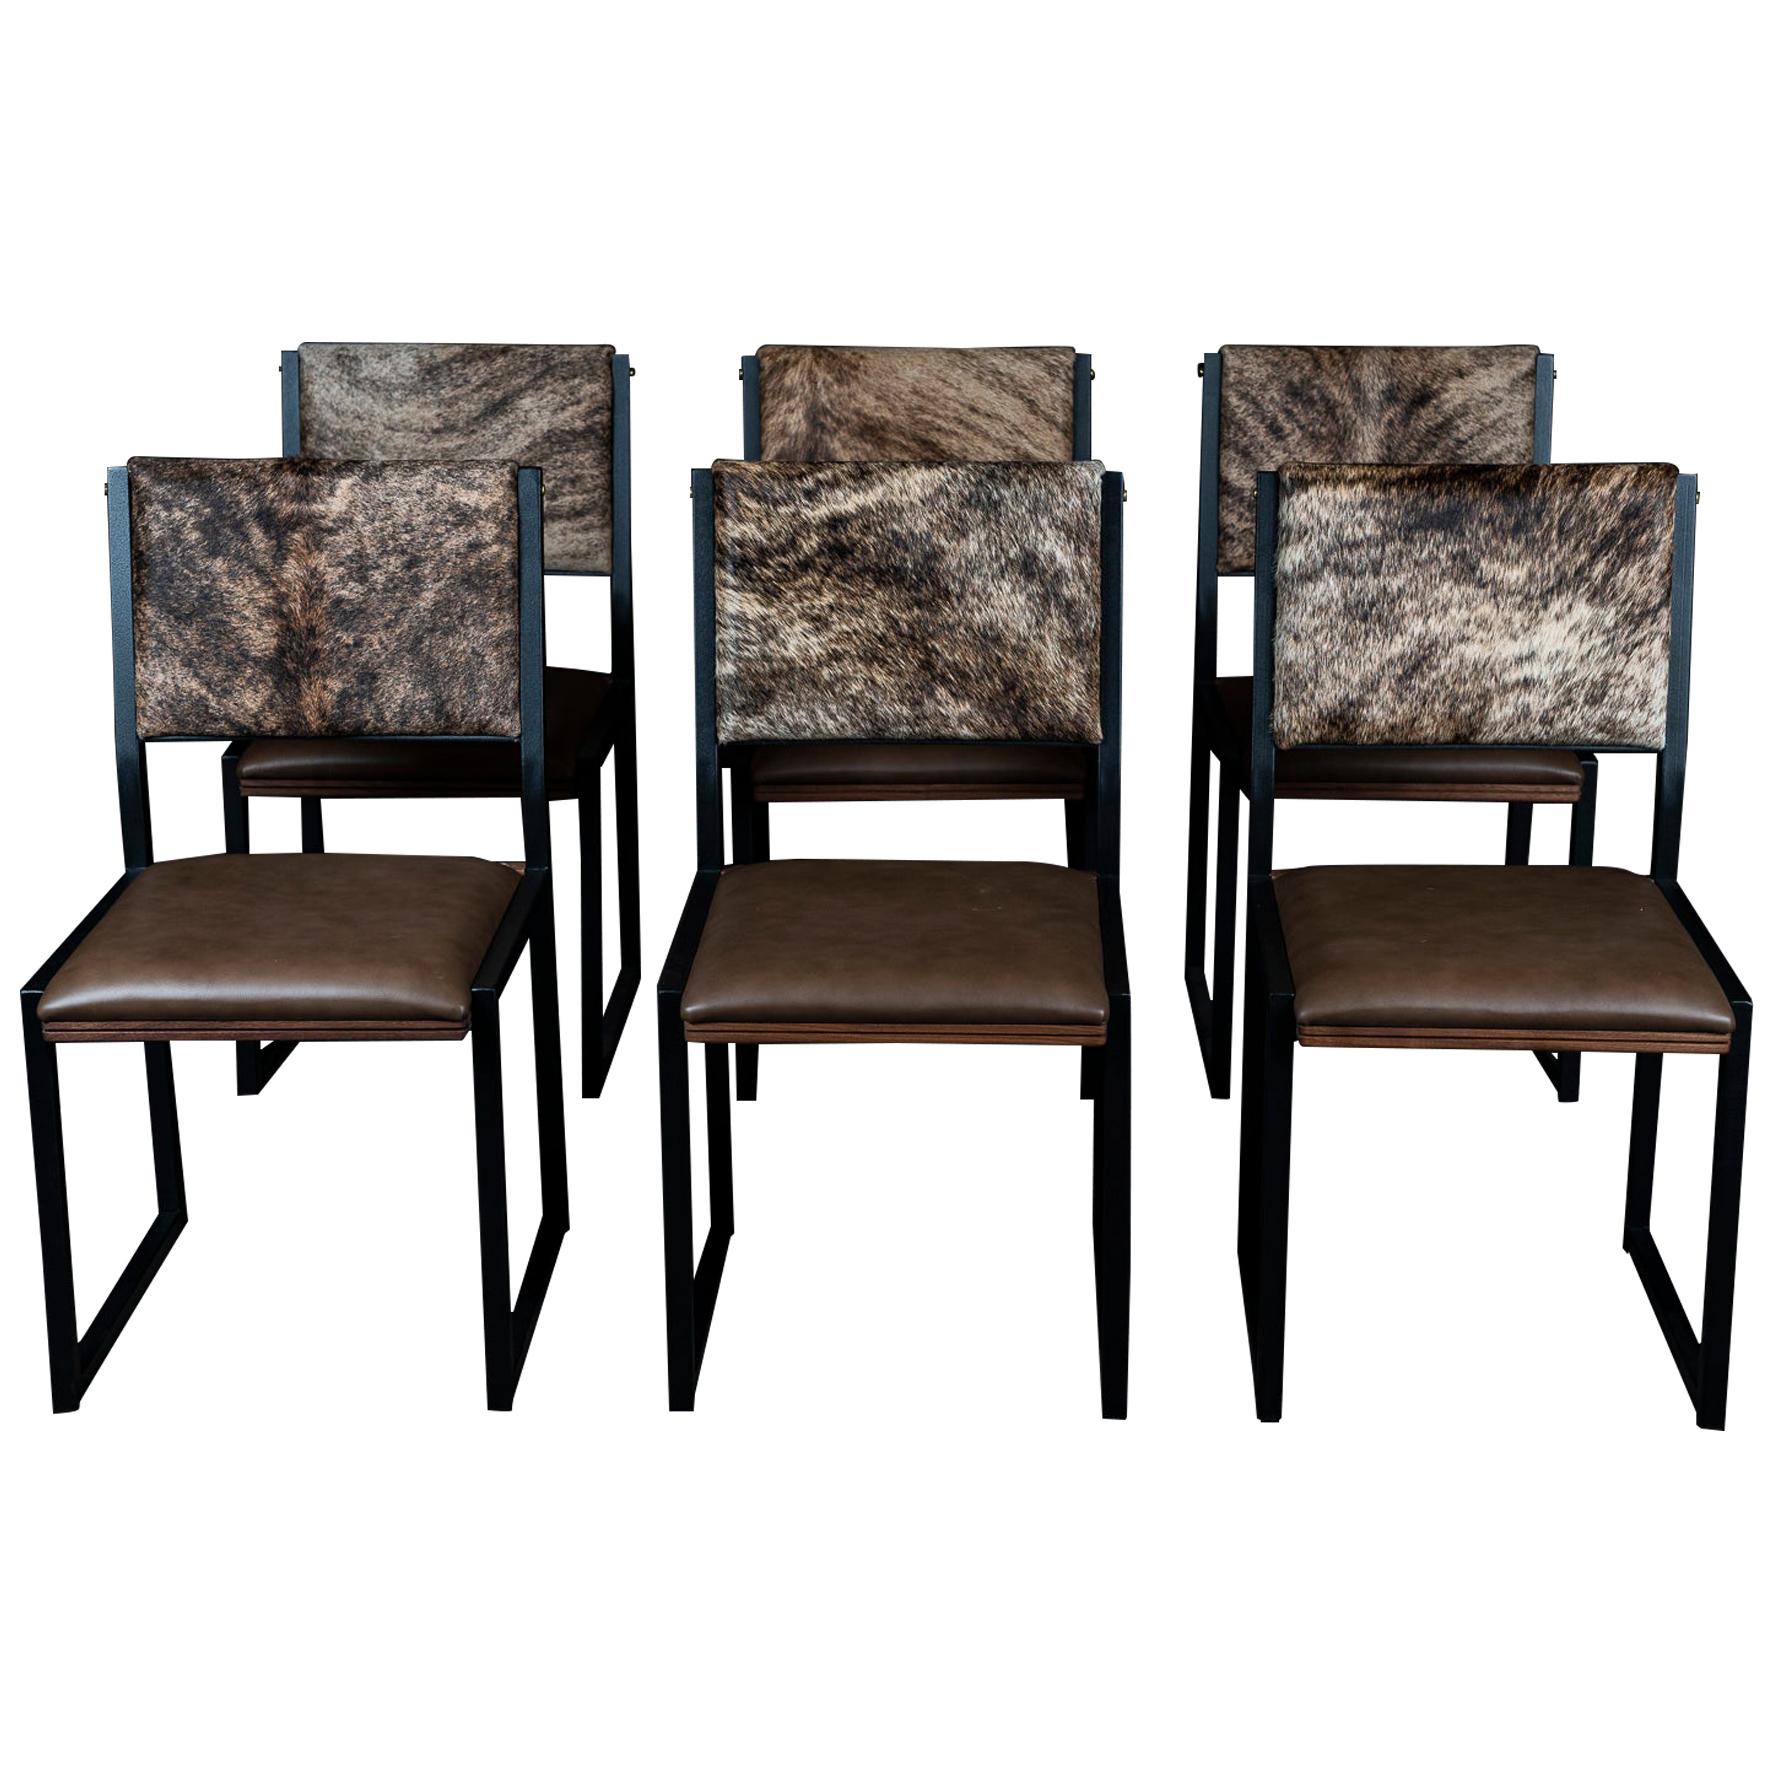 6x Shaker Modern Chair by Ambrozia, Walnut, Brown Leather, Brown Brindle Cowhide